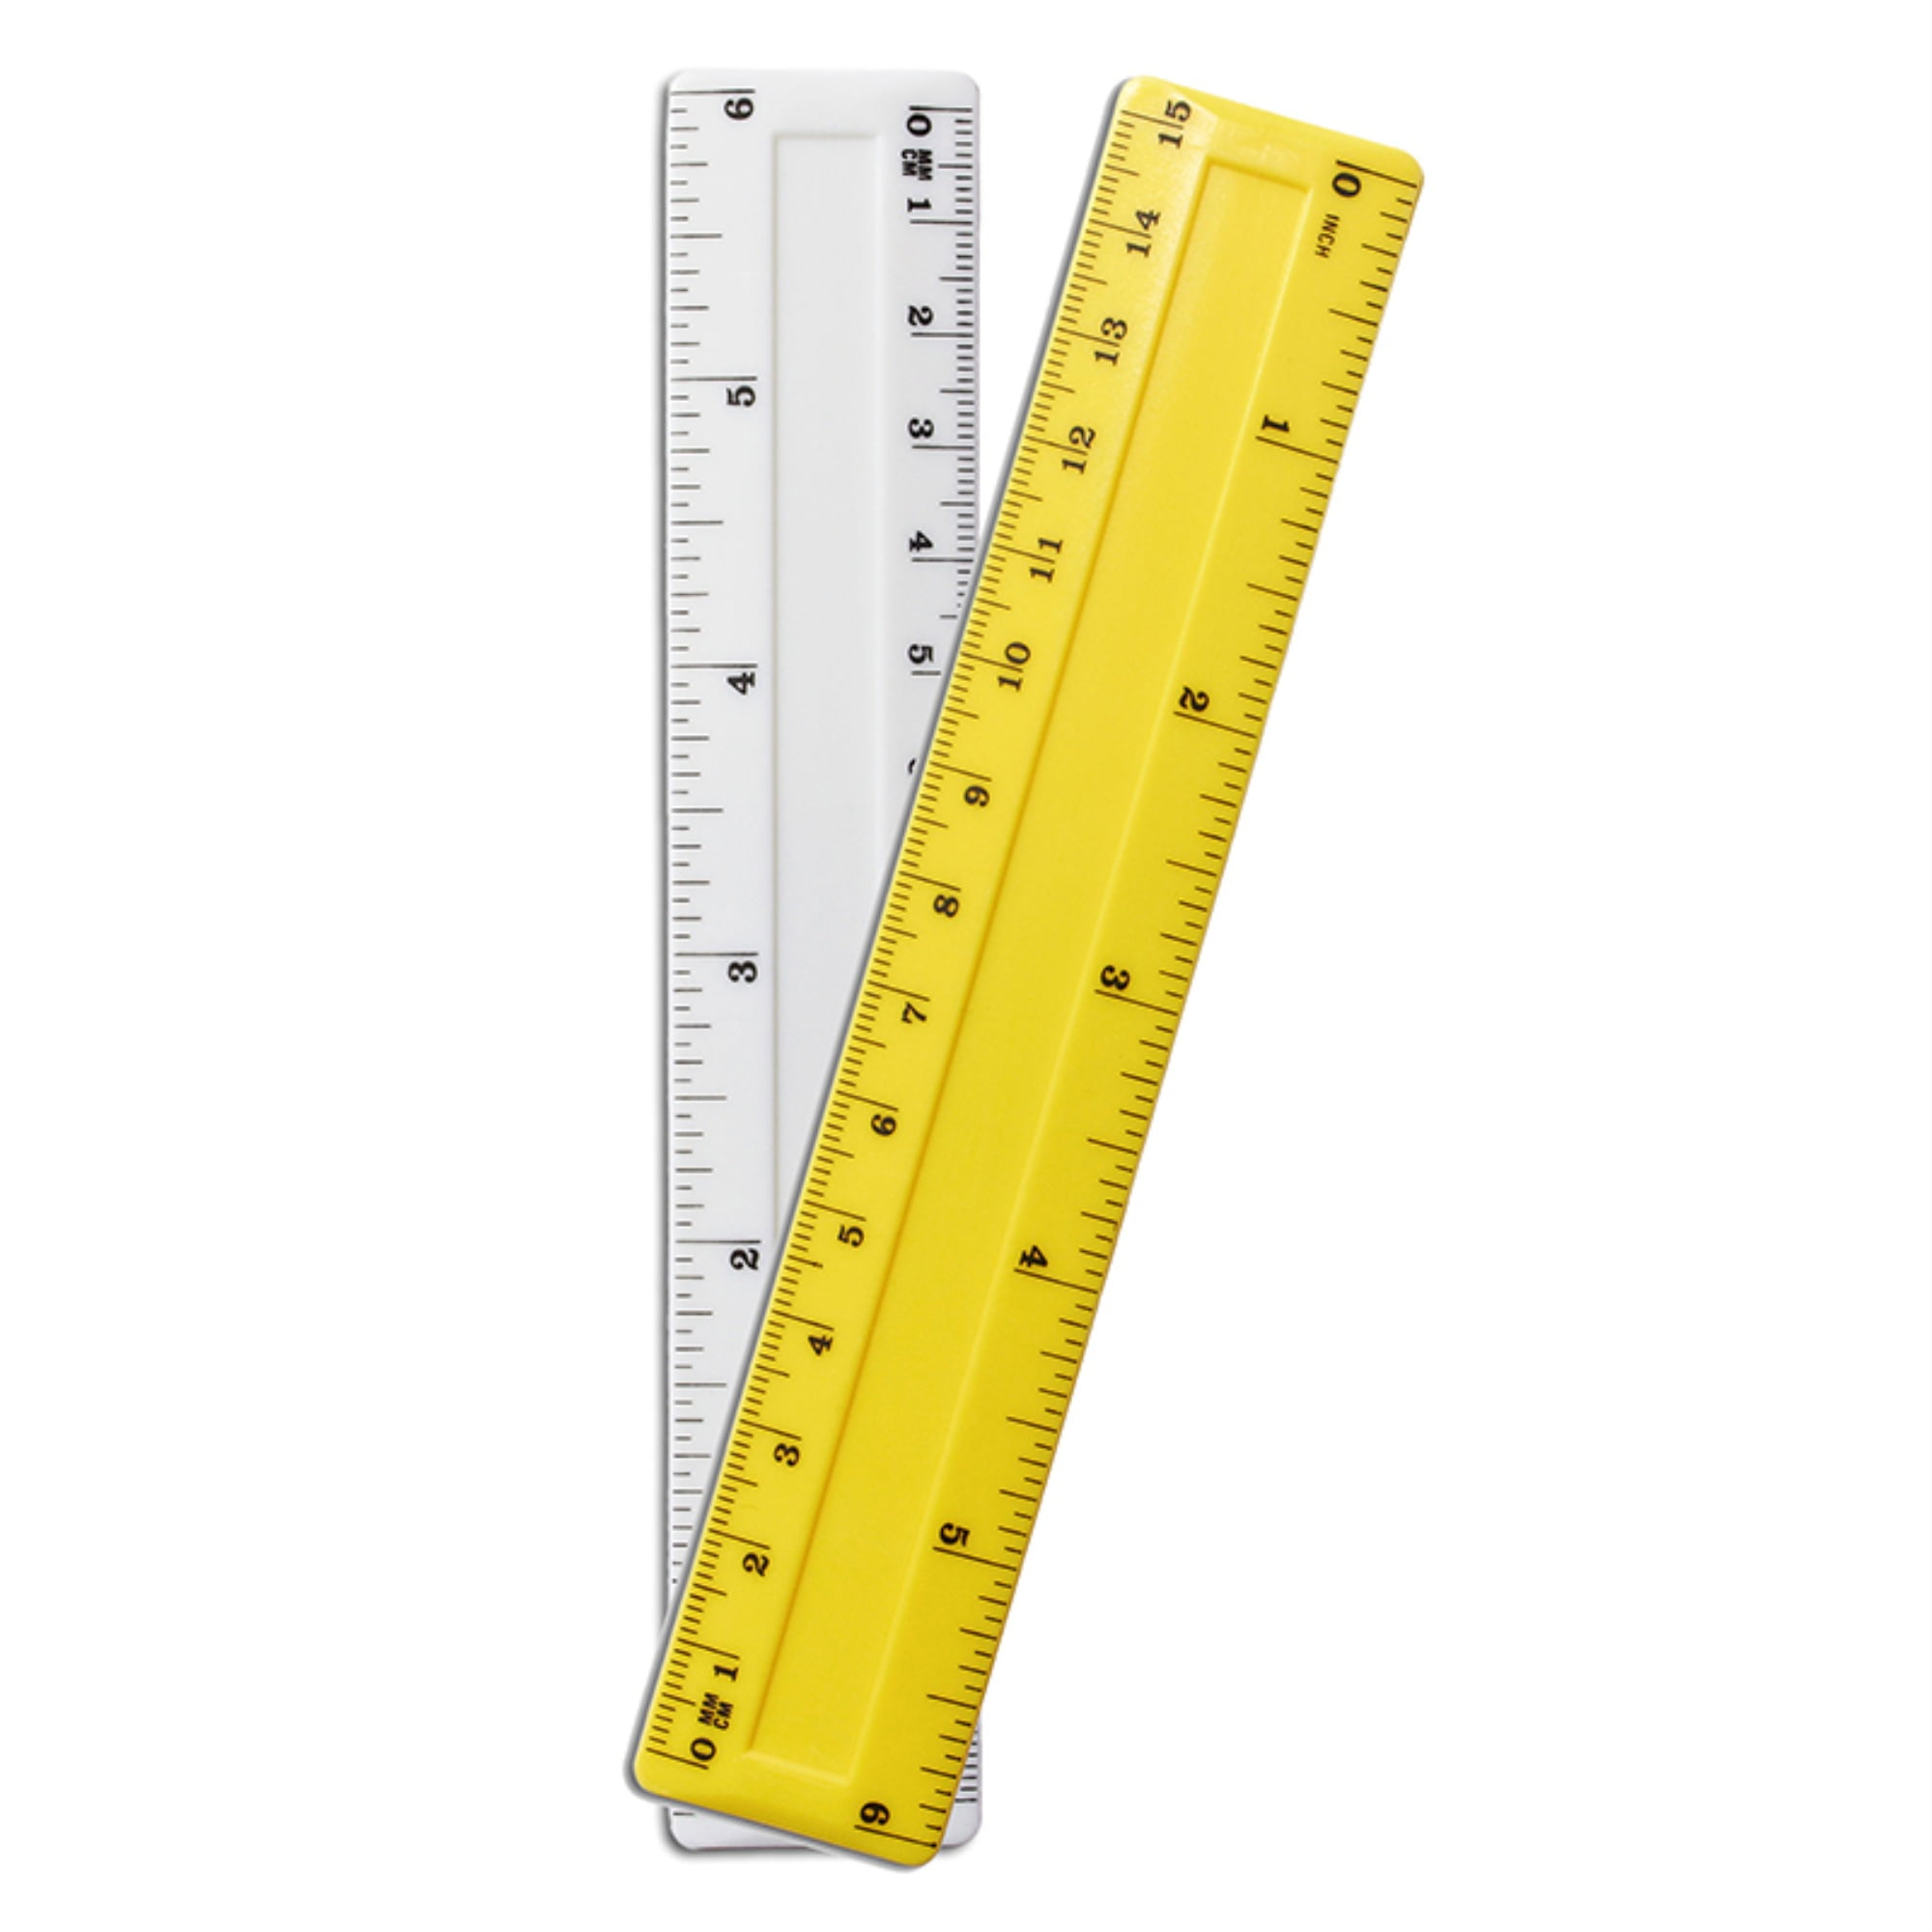 School Smart Lightweight Strong Plastic Ruler 6 Inches Pack of 6 